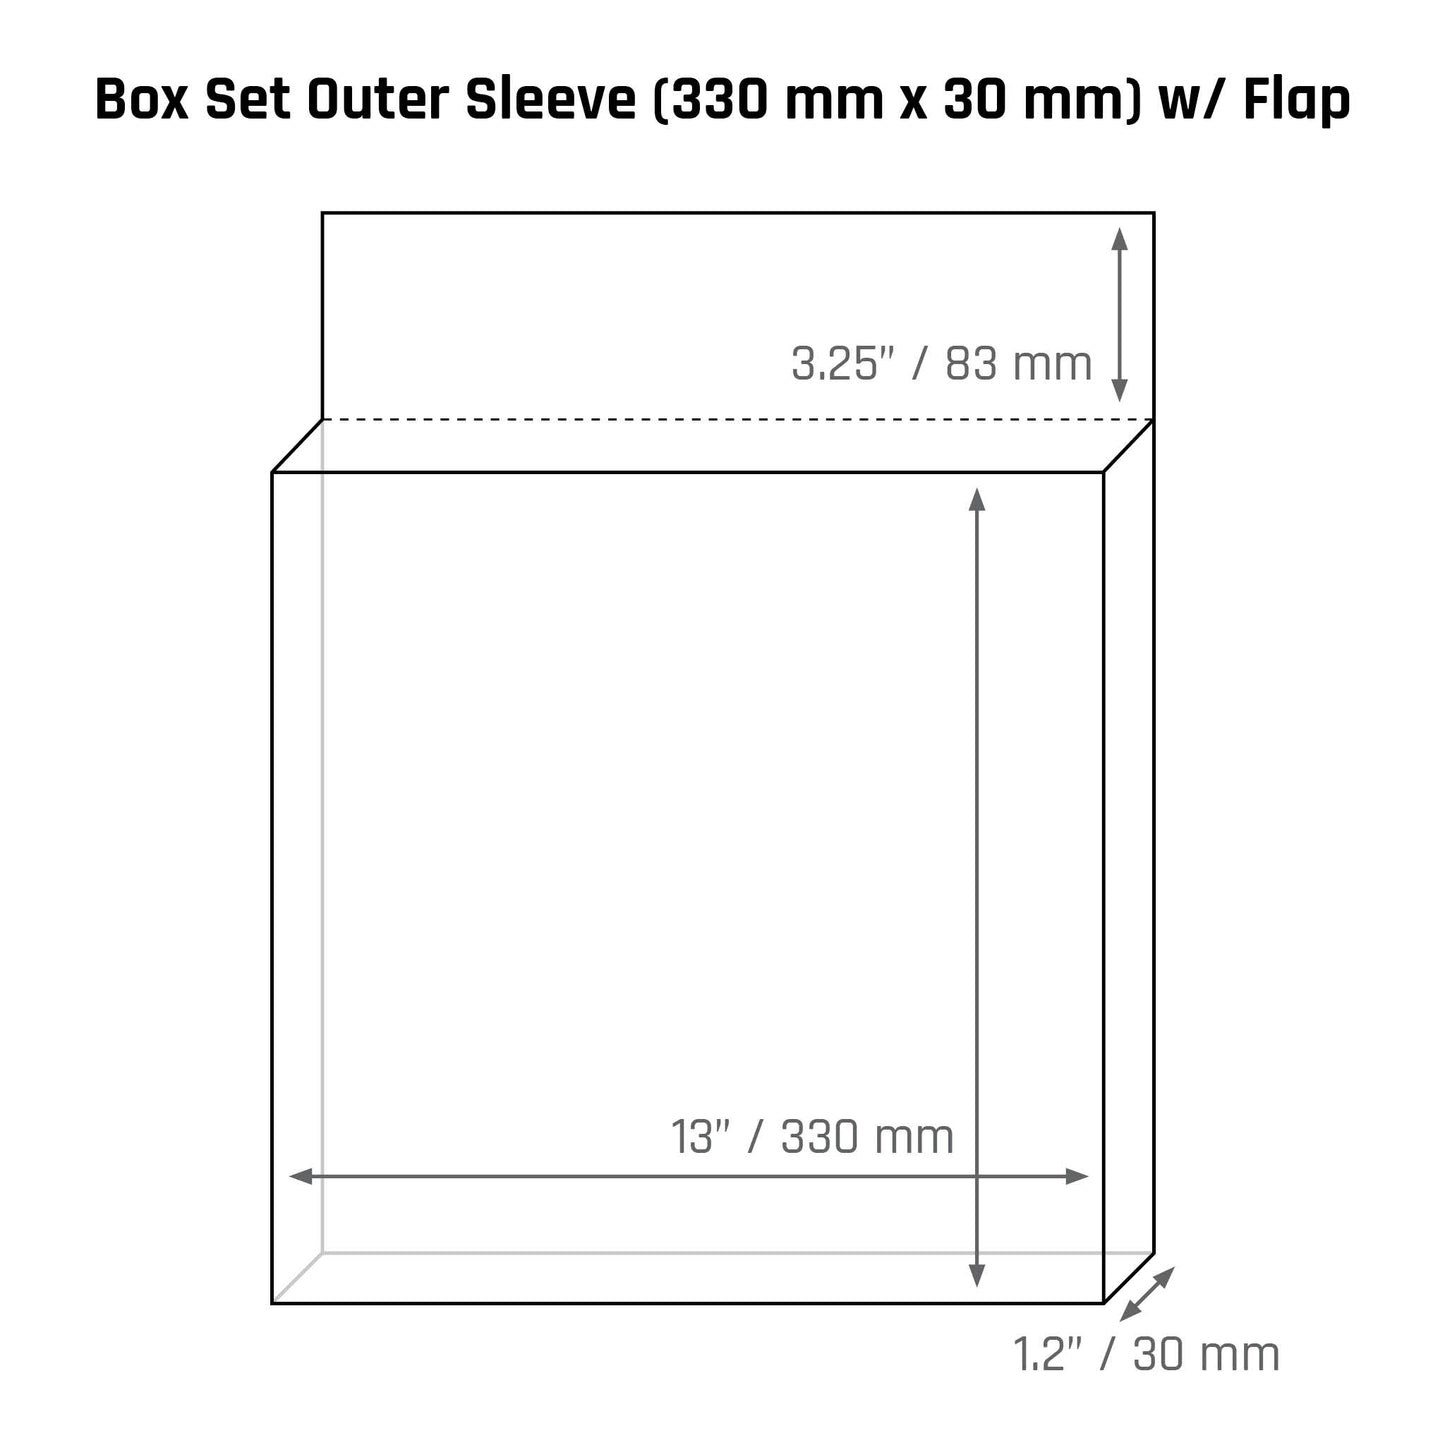 Box Set Outer Sleeve (330 mm x 30 mm) - 3mil